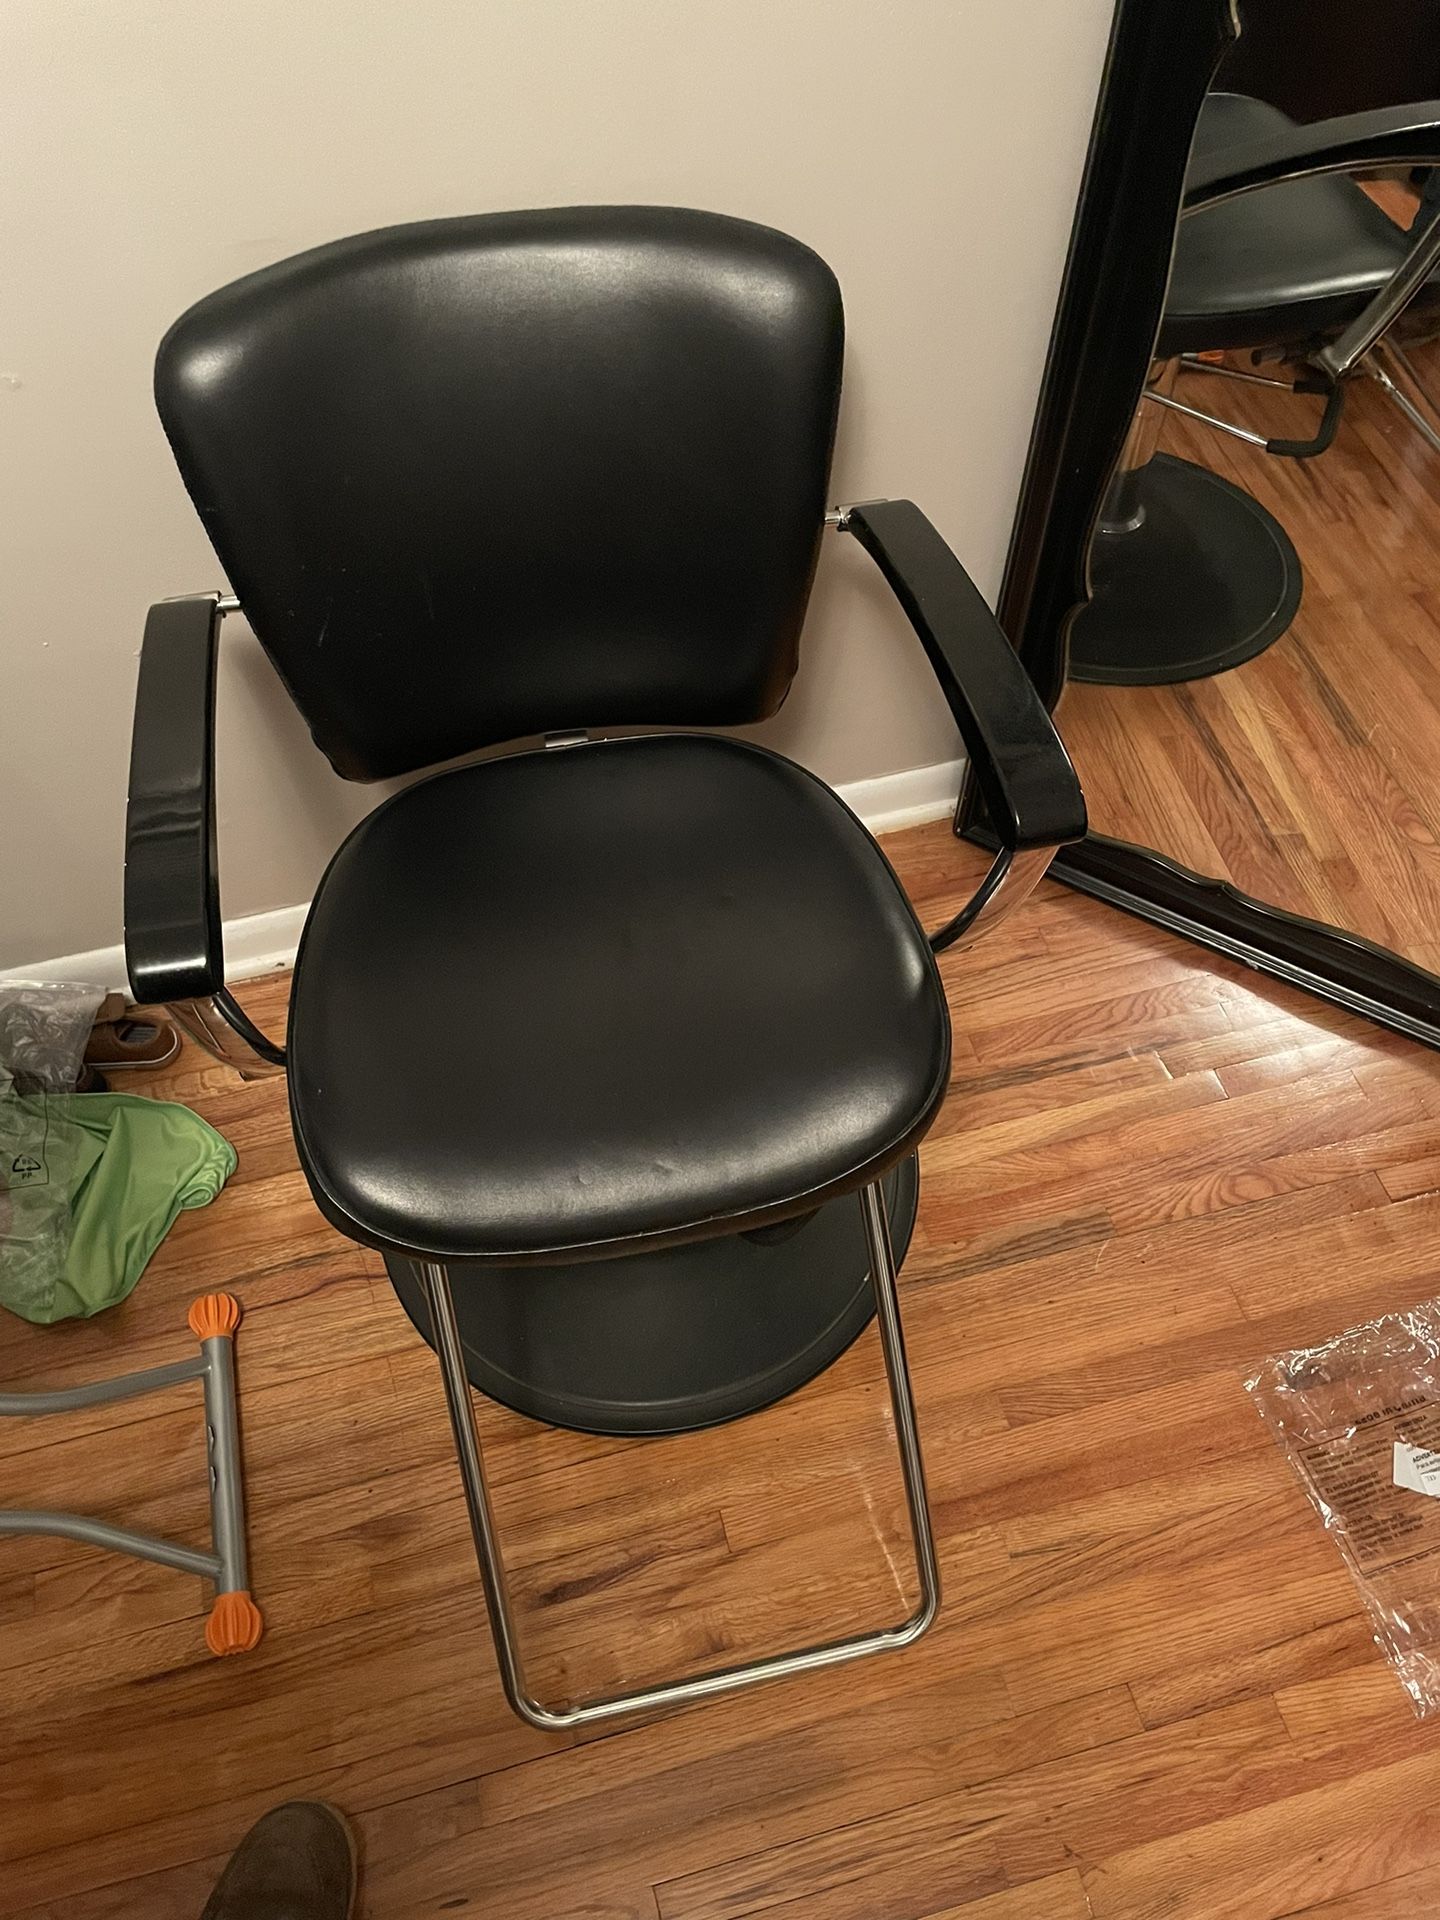 Hairstylist Chair And Decor